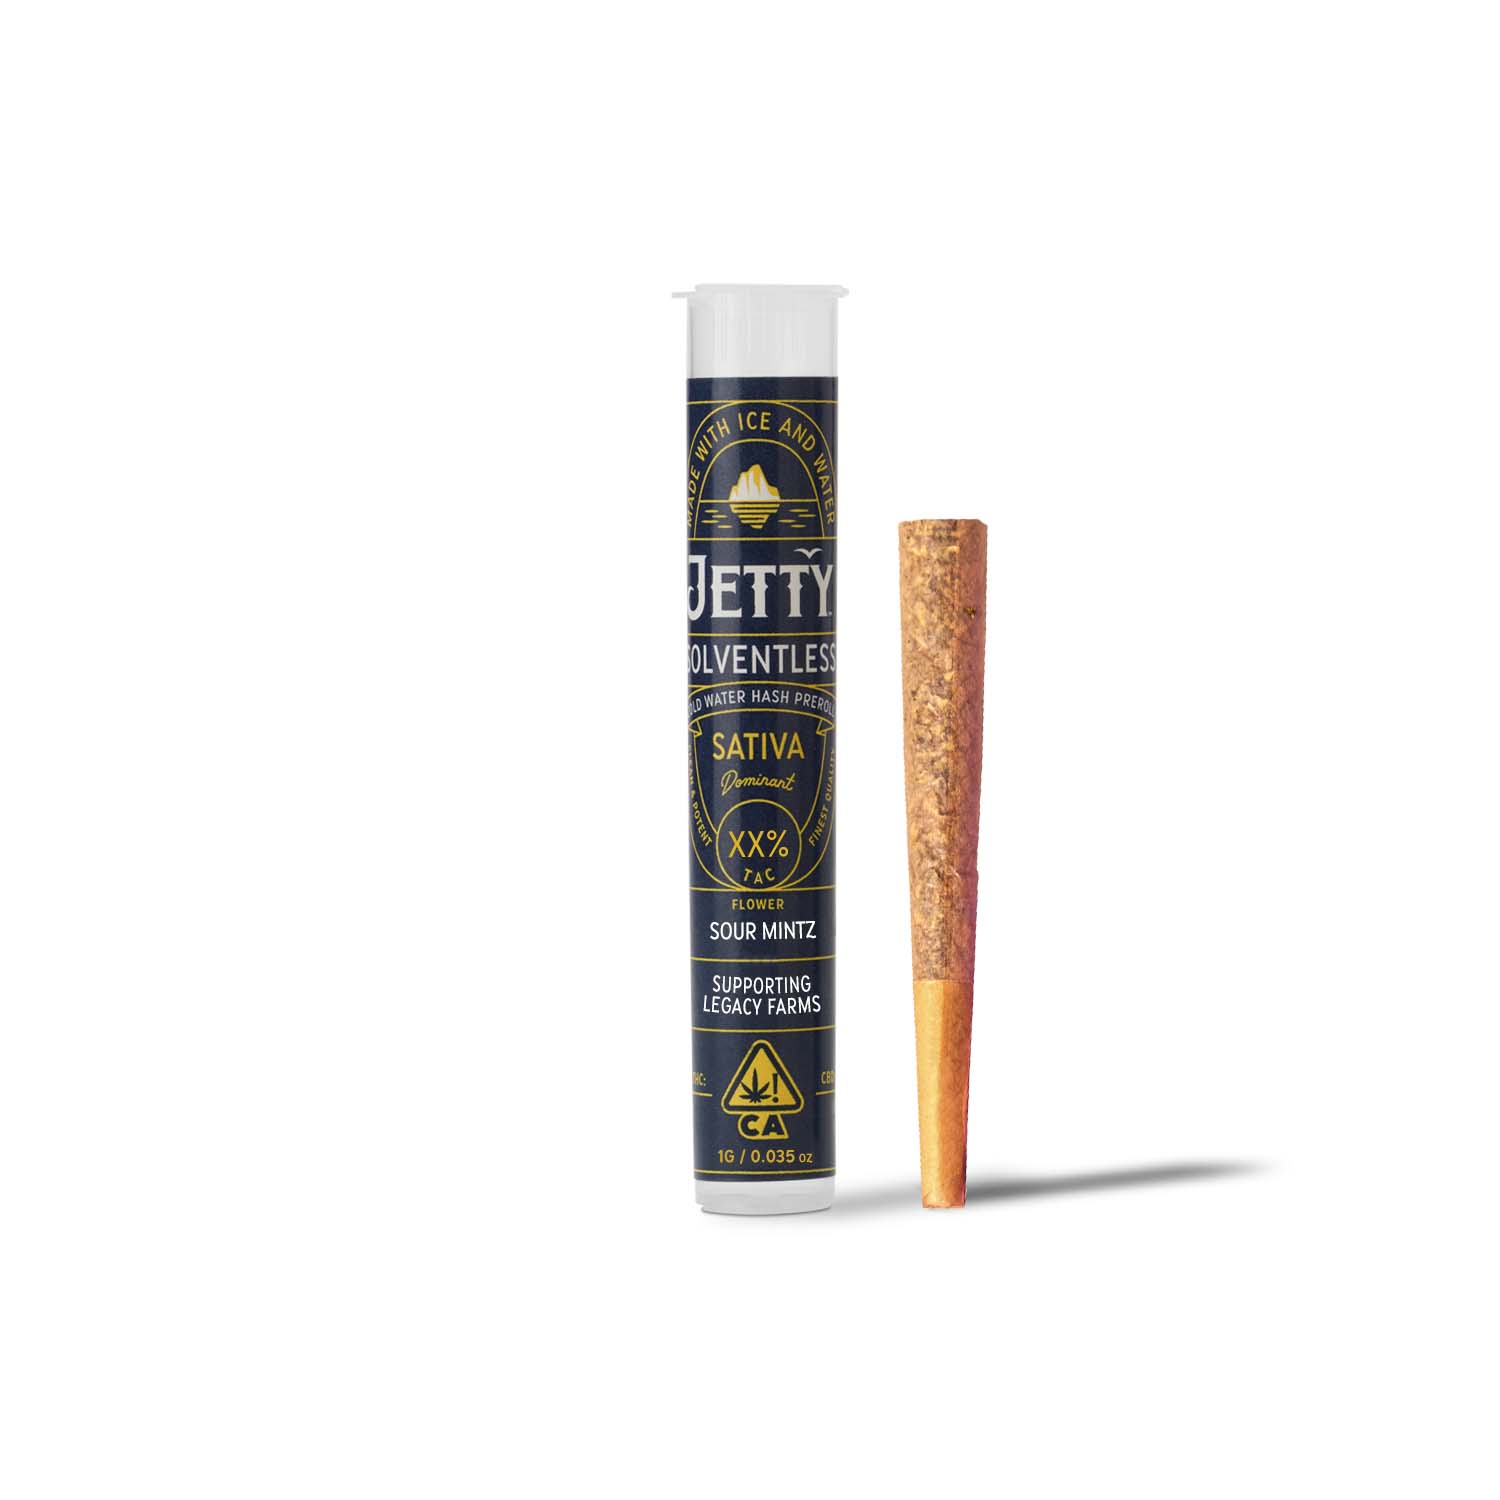 A photograph of Jetty 1g Solventless Preroll Sour Mintz